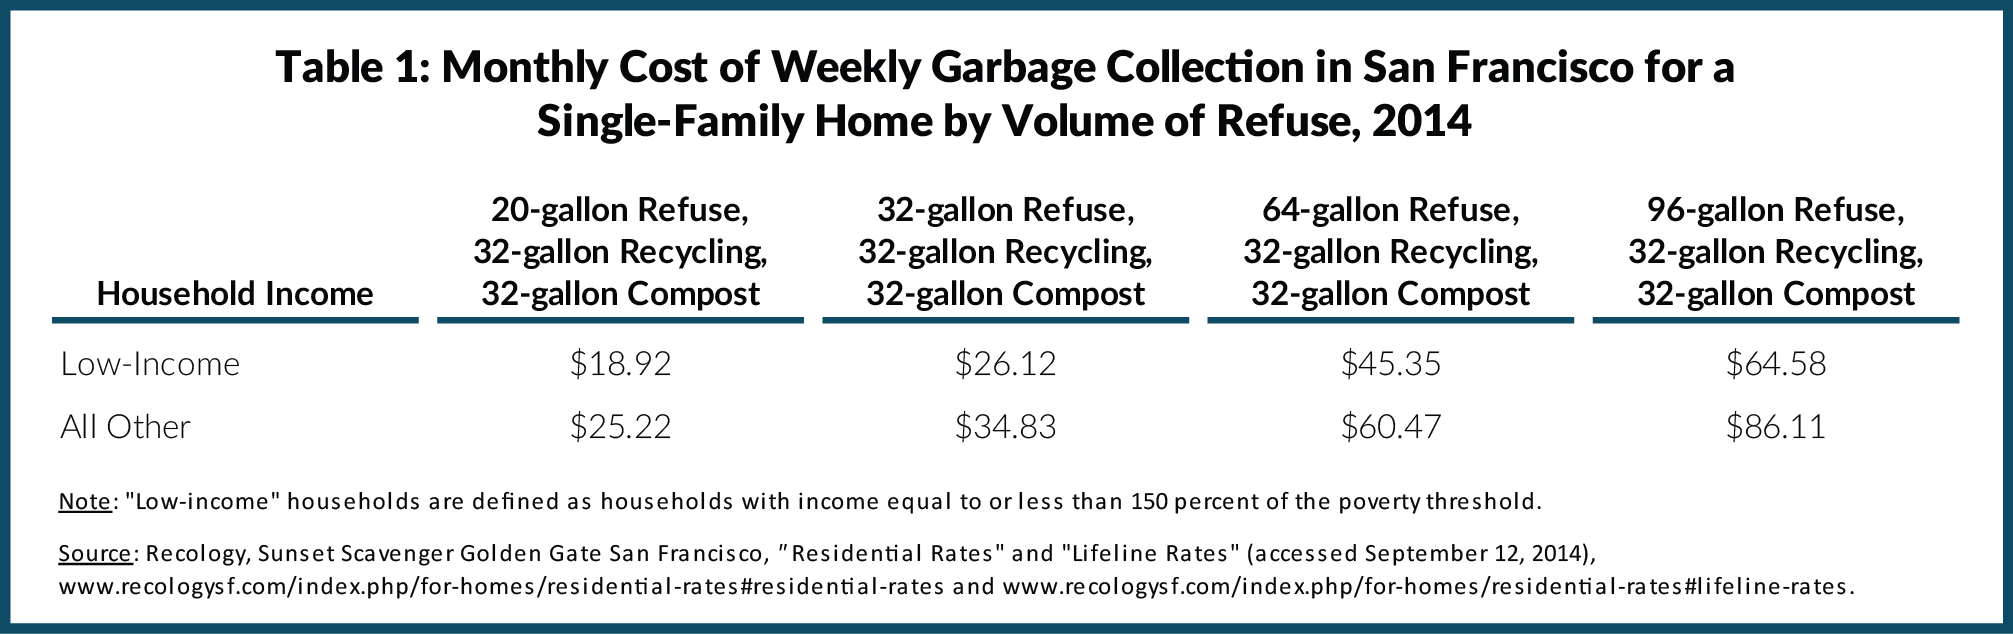 Table 1: Monthly Cost of Weekly Garbage Collection in San Francisco for a Single-Family Home by Volume of Refuse, 2014